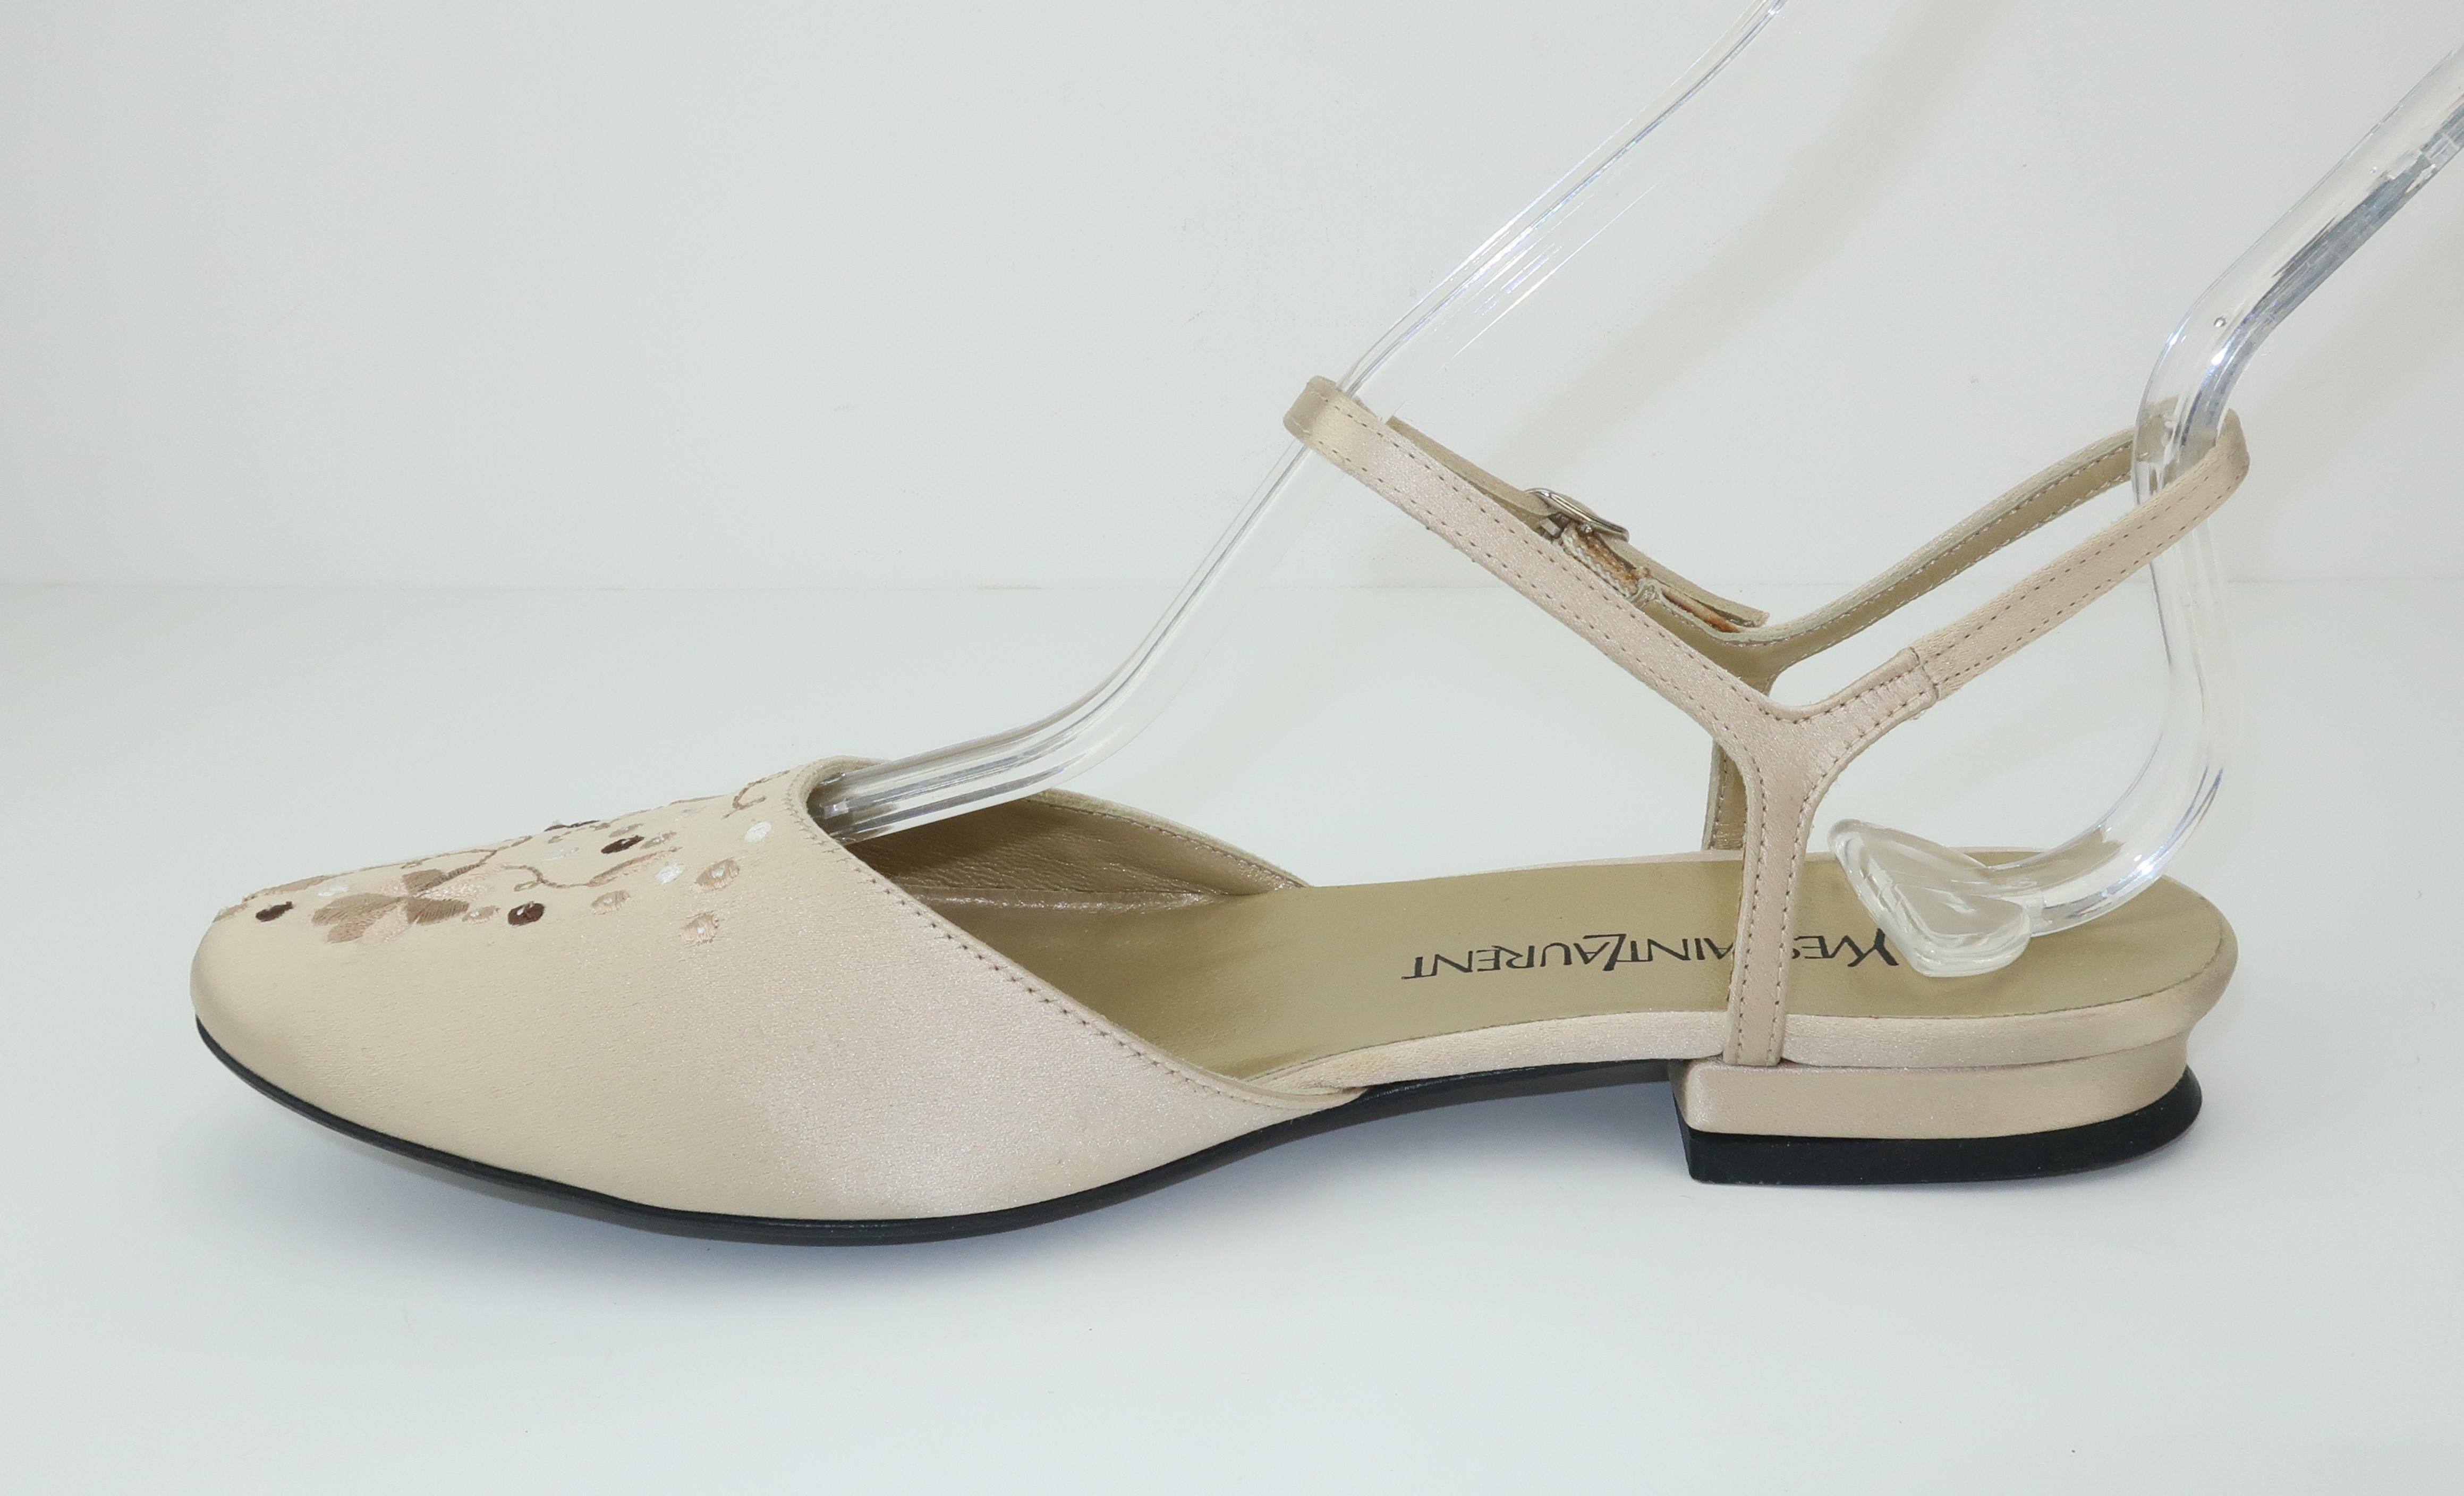 Yves Saint Laurent Ivory Satin Embroidered Shoes Sz 6 3